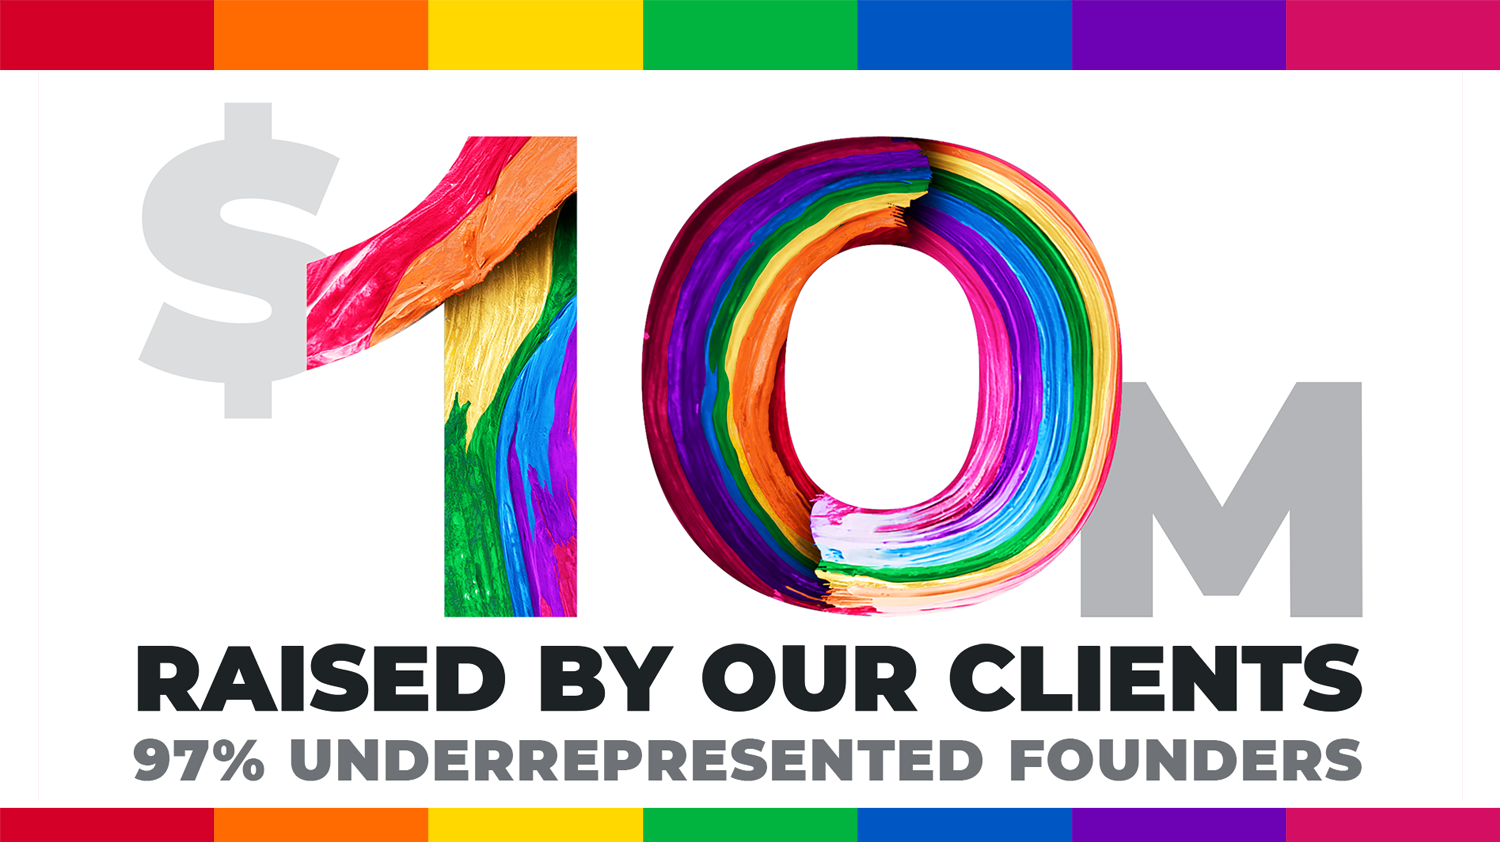 A celebratory graphic proclaiming that $10 million has been raised by our clients, which went to 97% underrepresented founders.